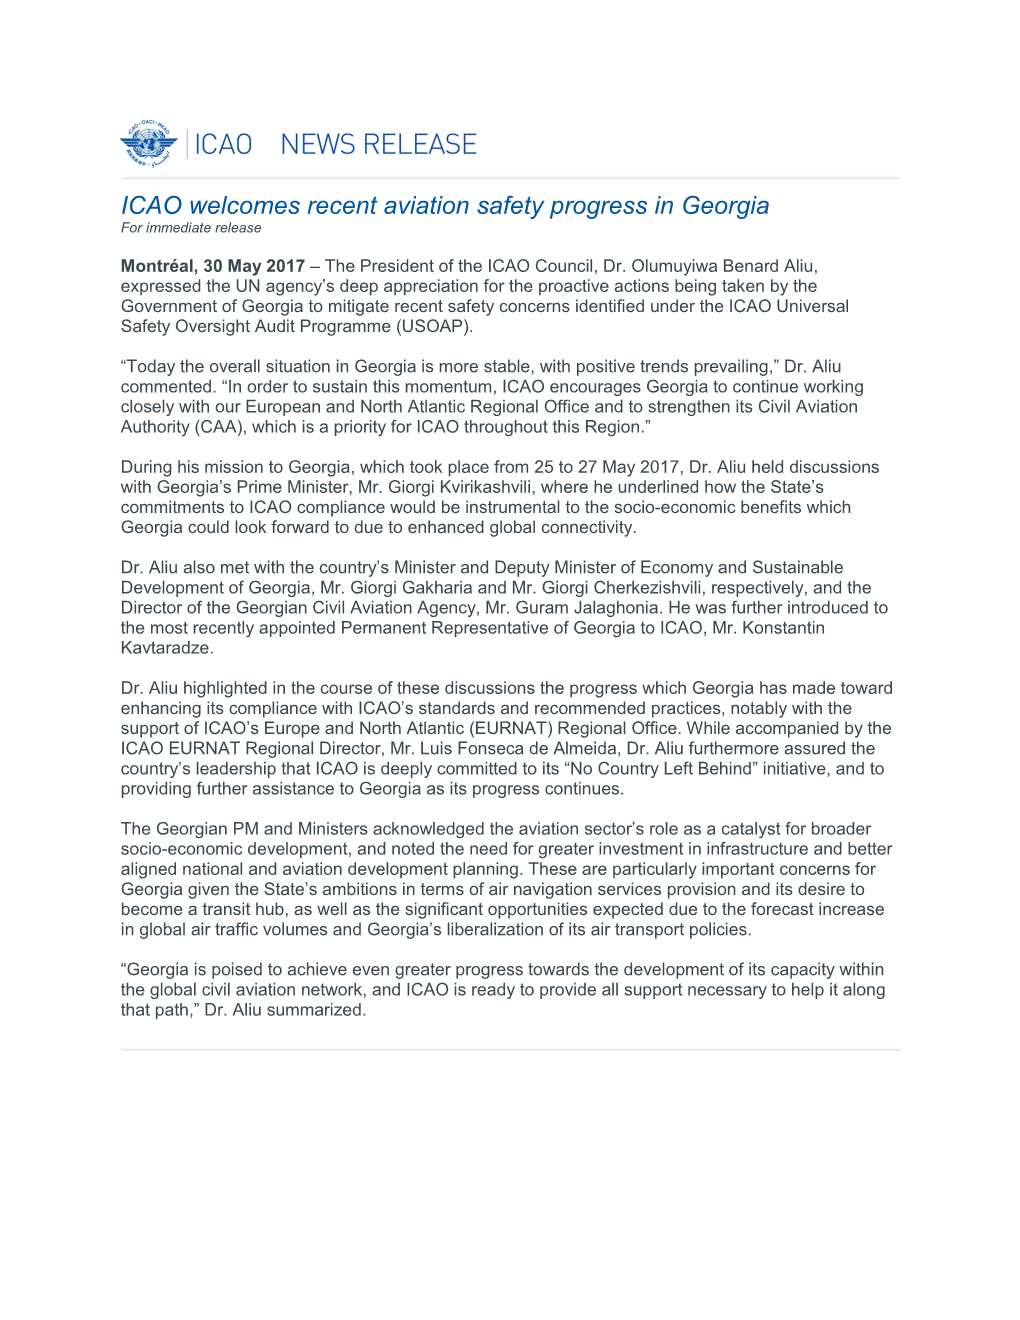 ICAO Welcomes Recent Aviation Safety Progress in Georgia for Immediate Release